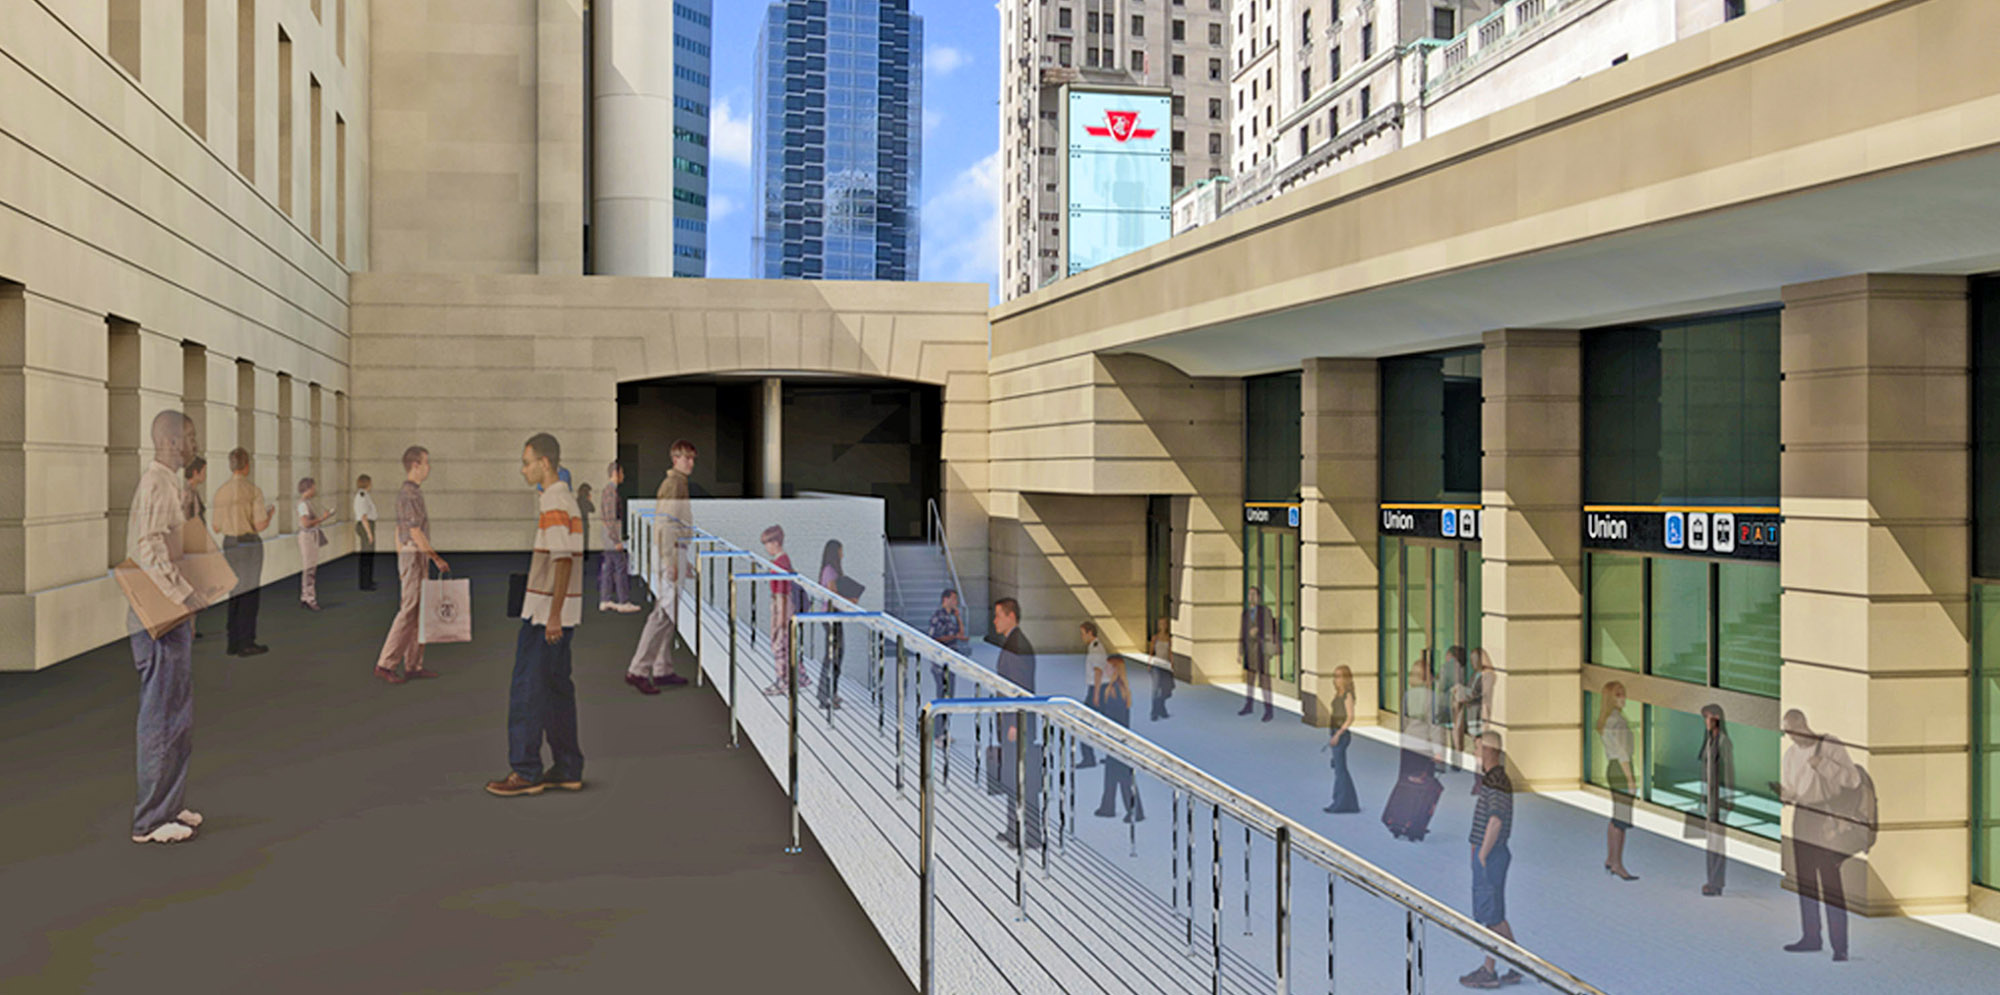 Union Station Entrance Rendering